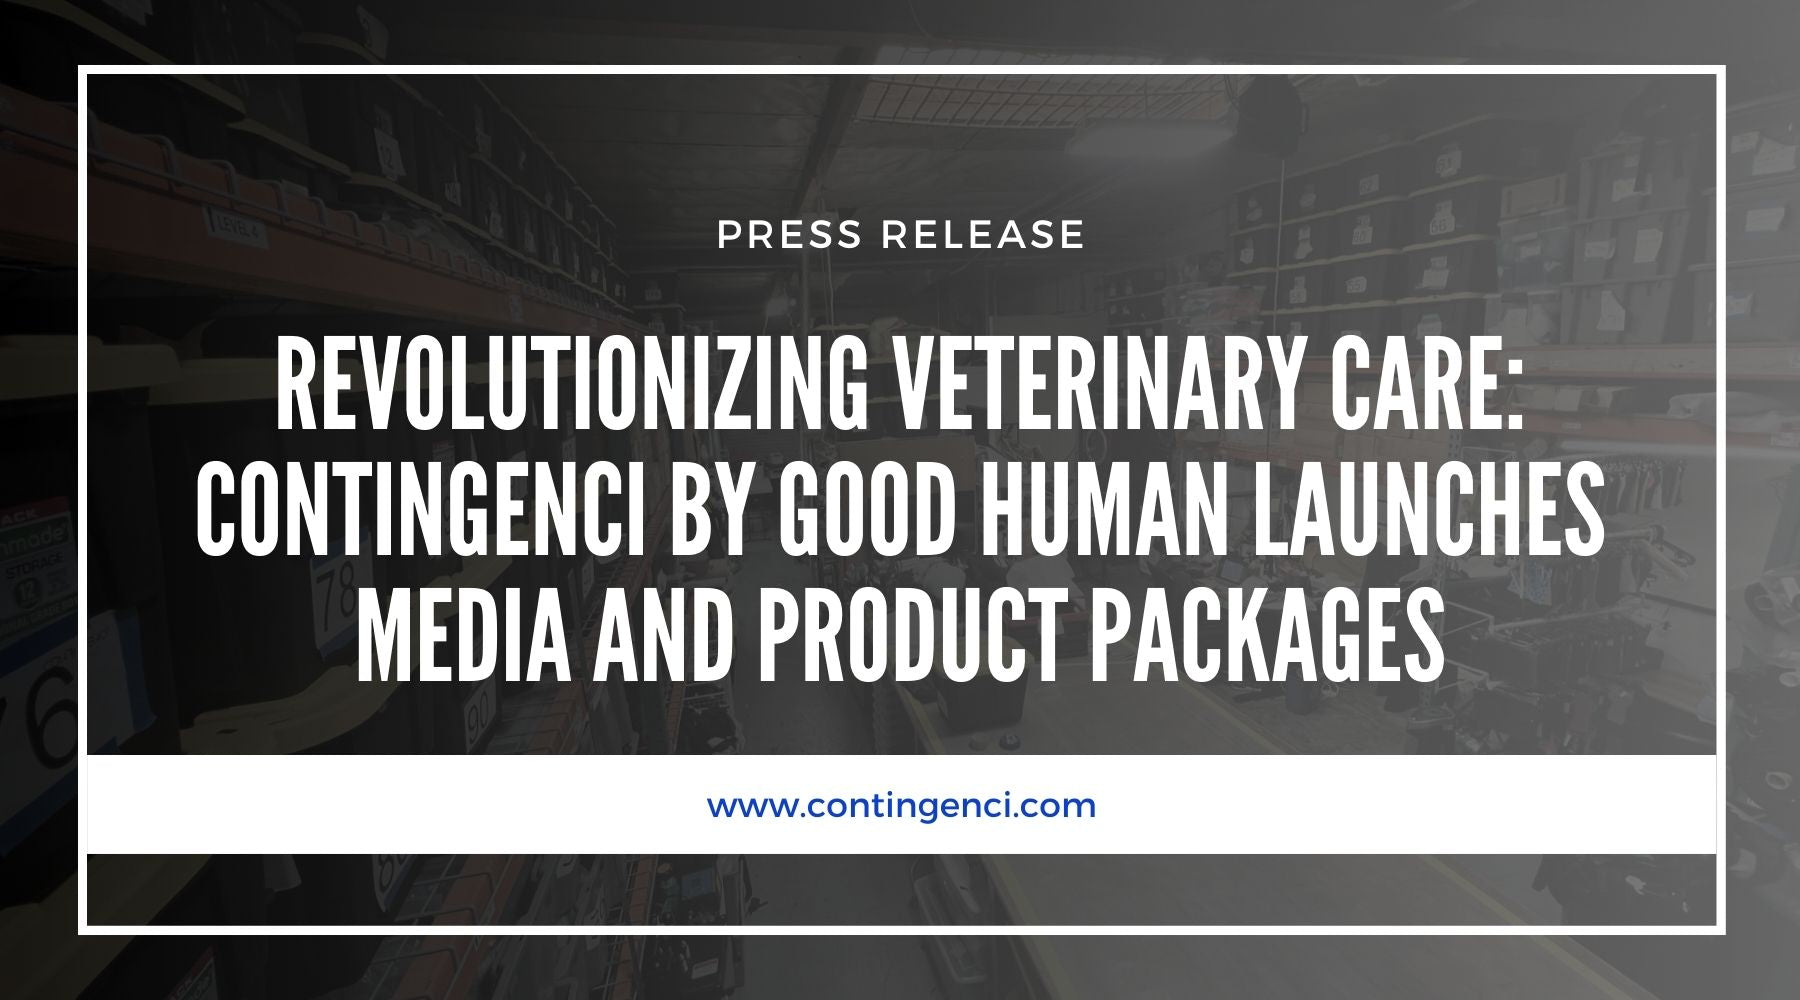 Contingenci by Good Human LLC offers affordable service packages for veterinary clinics, including sustainable products for pets to increase their comfort.